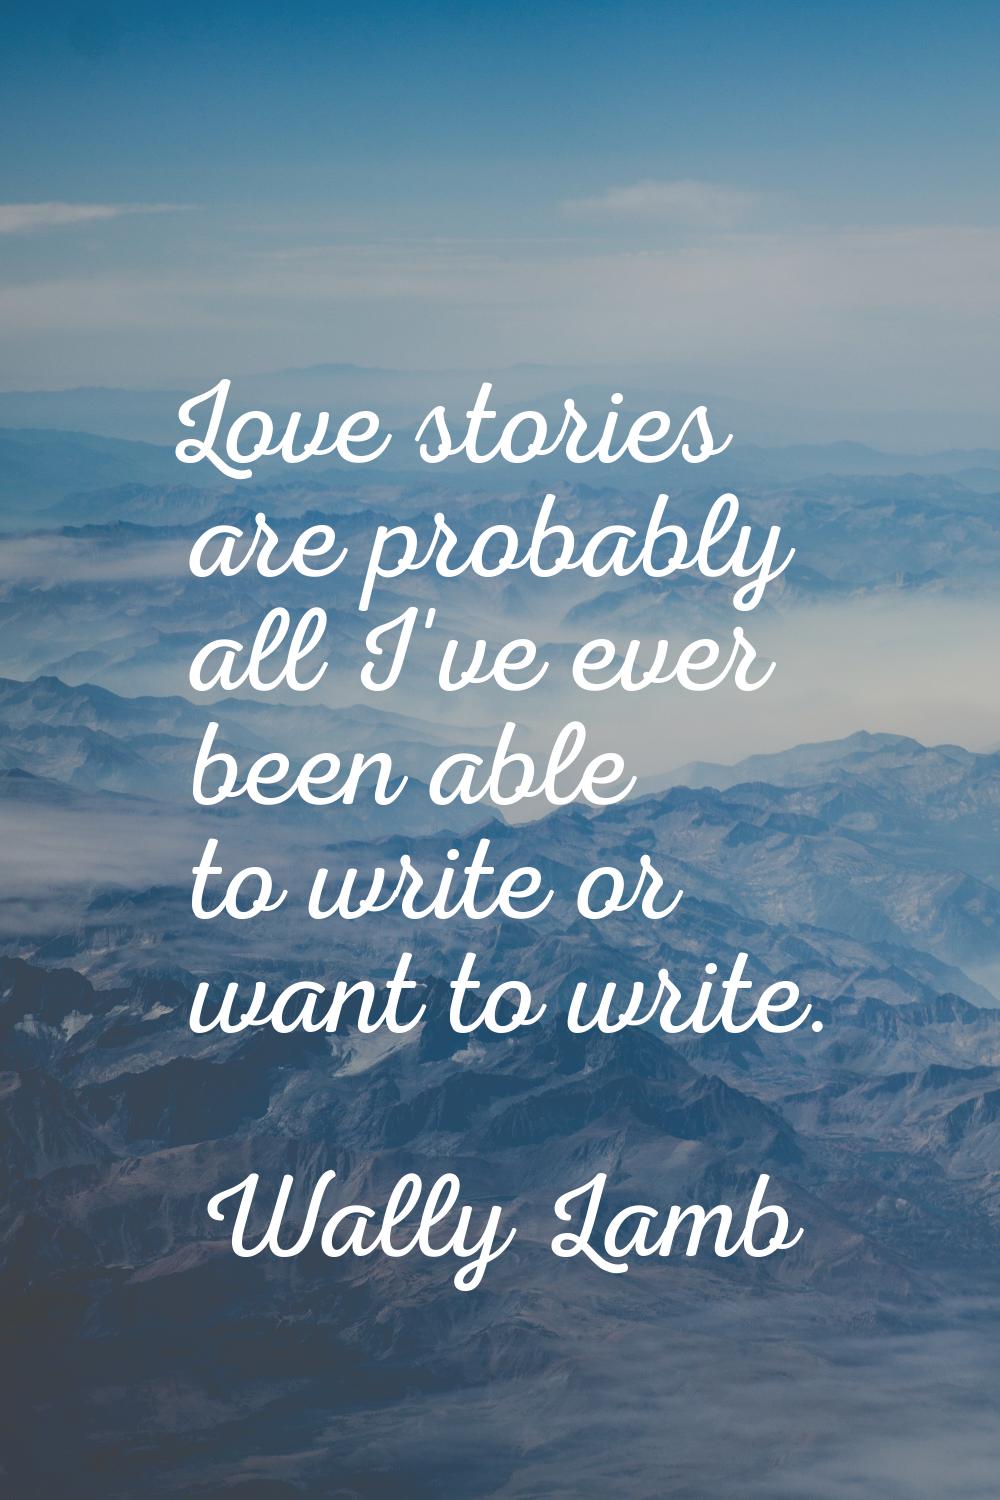 Love stories are probably all I've ever been able to write or want to write.